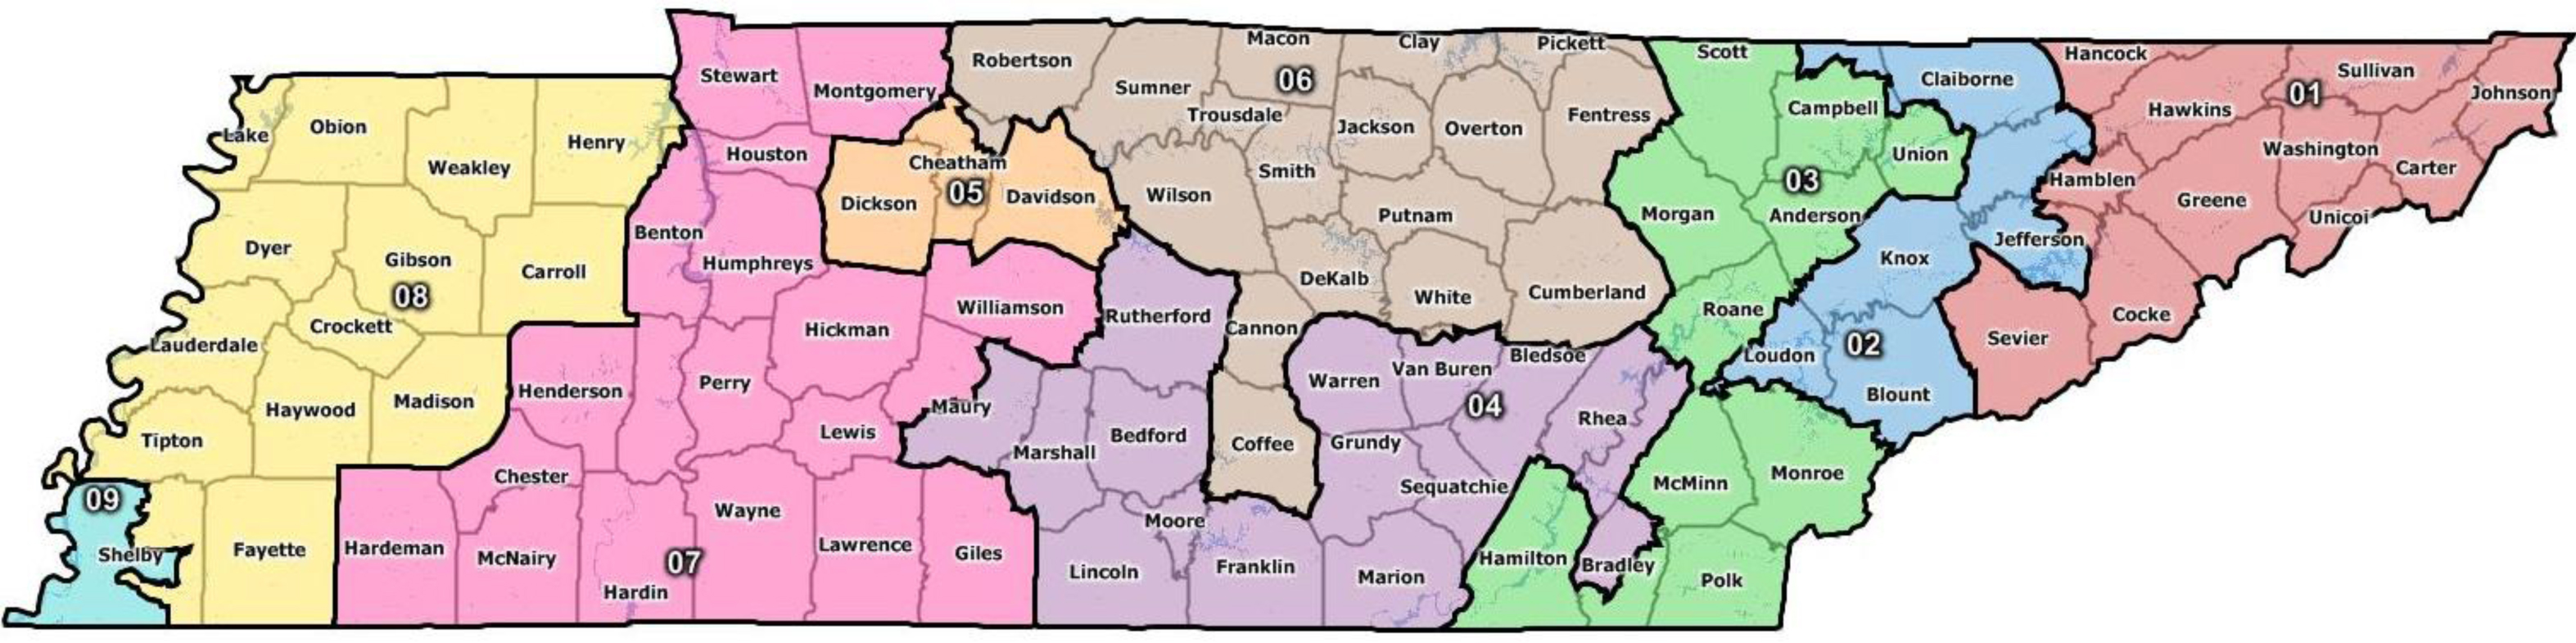 proposed-congressional-maps-change-tennessee-s-3rd-4th-districts